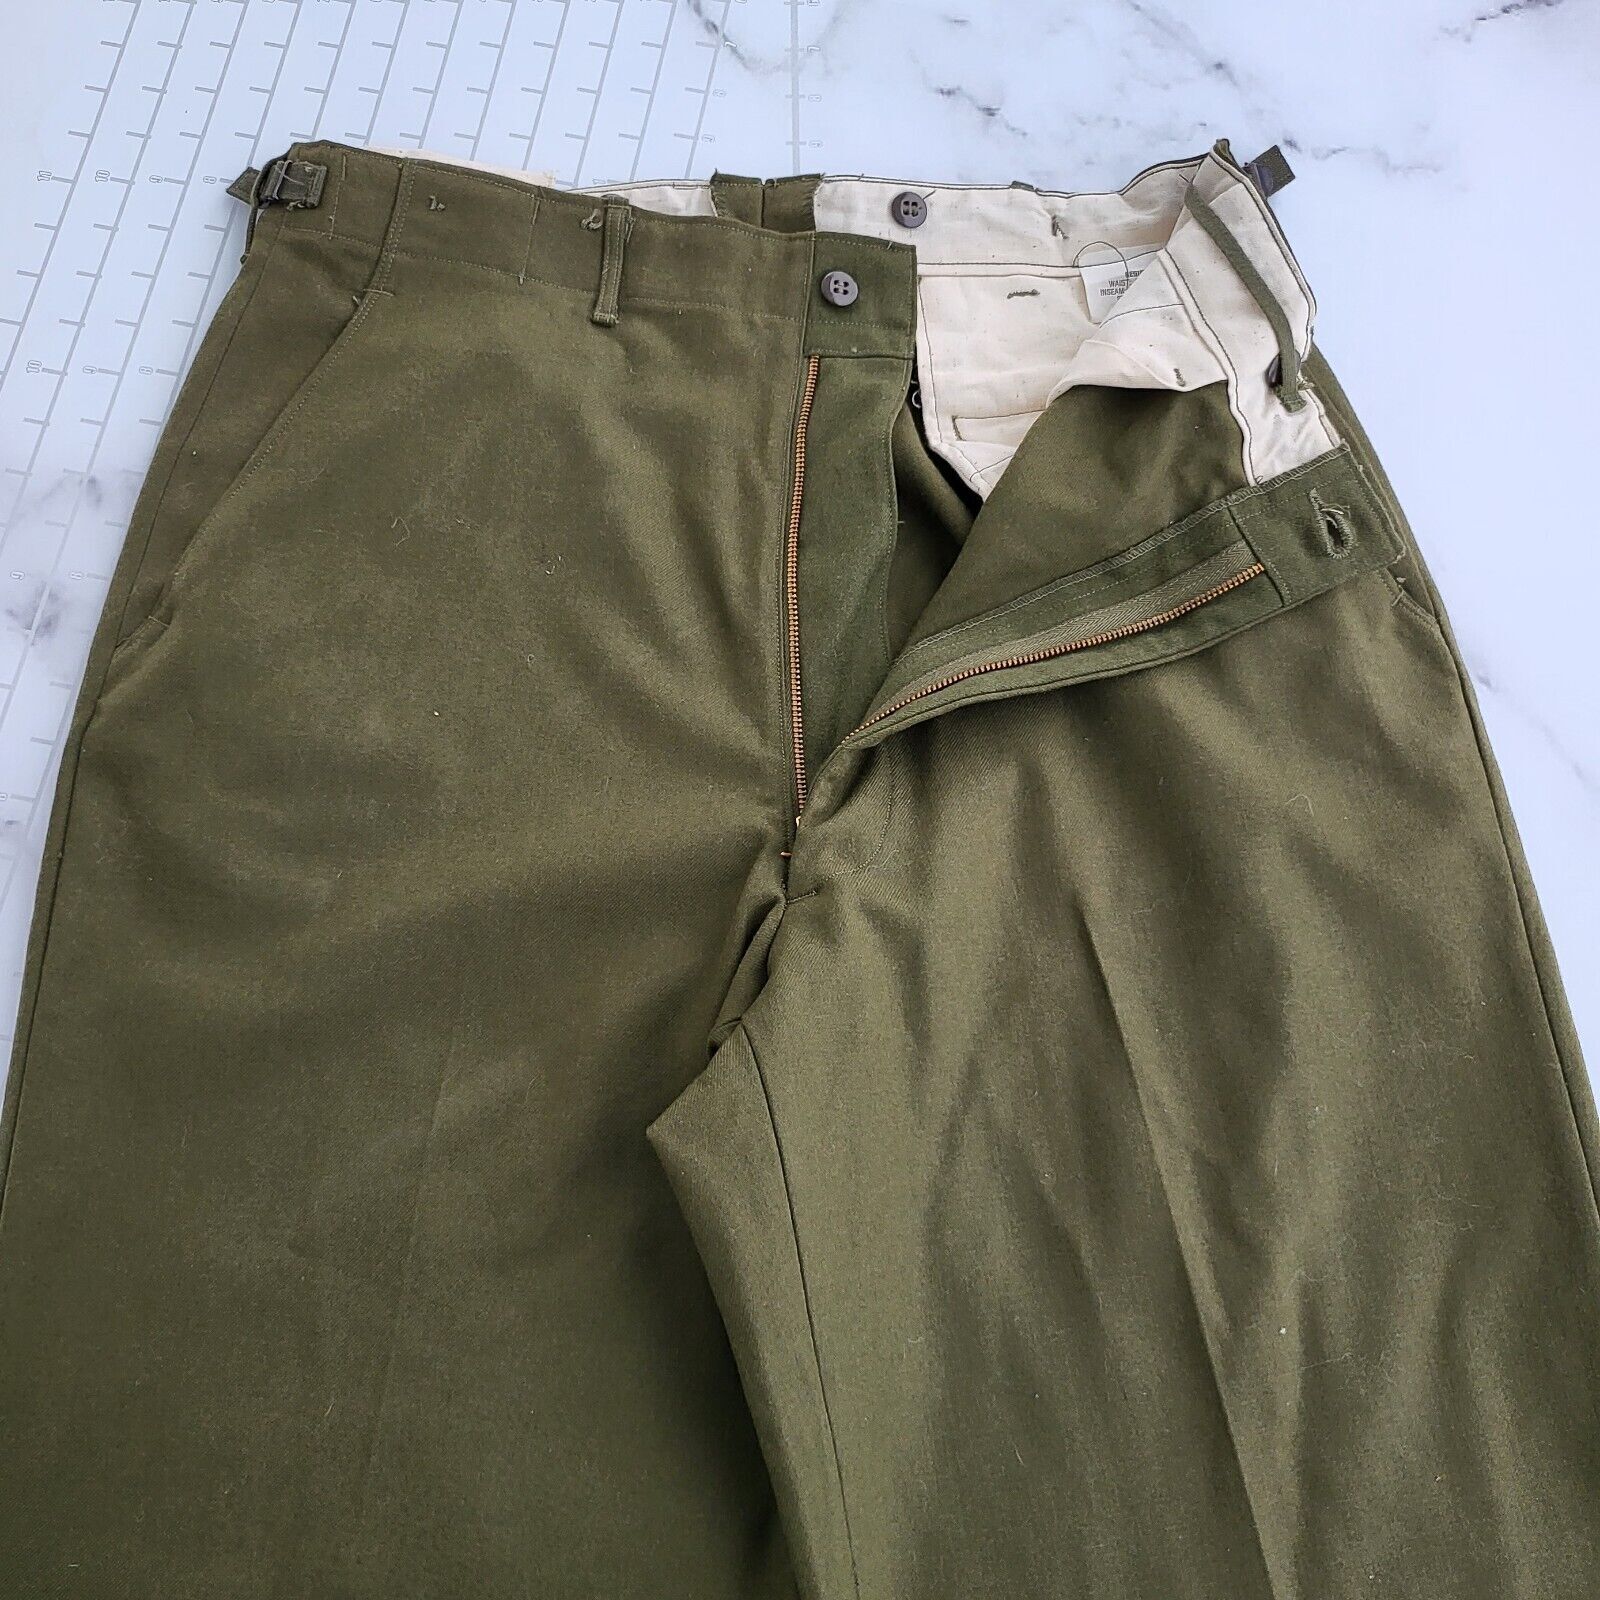 Army Field Pants Size 31 Green Wool Military Trousers Dark Wash M-1951 Olive